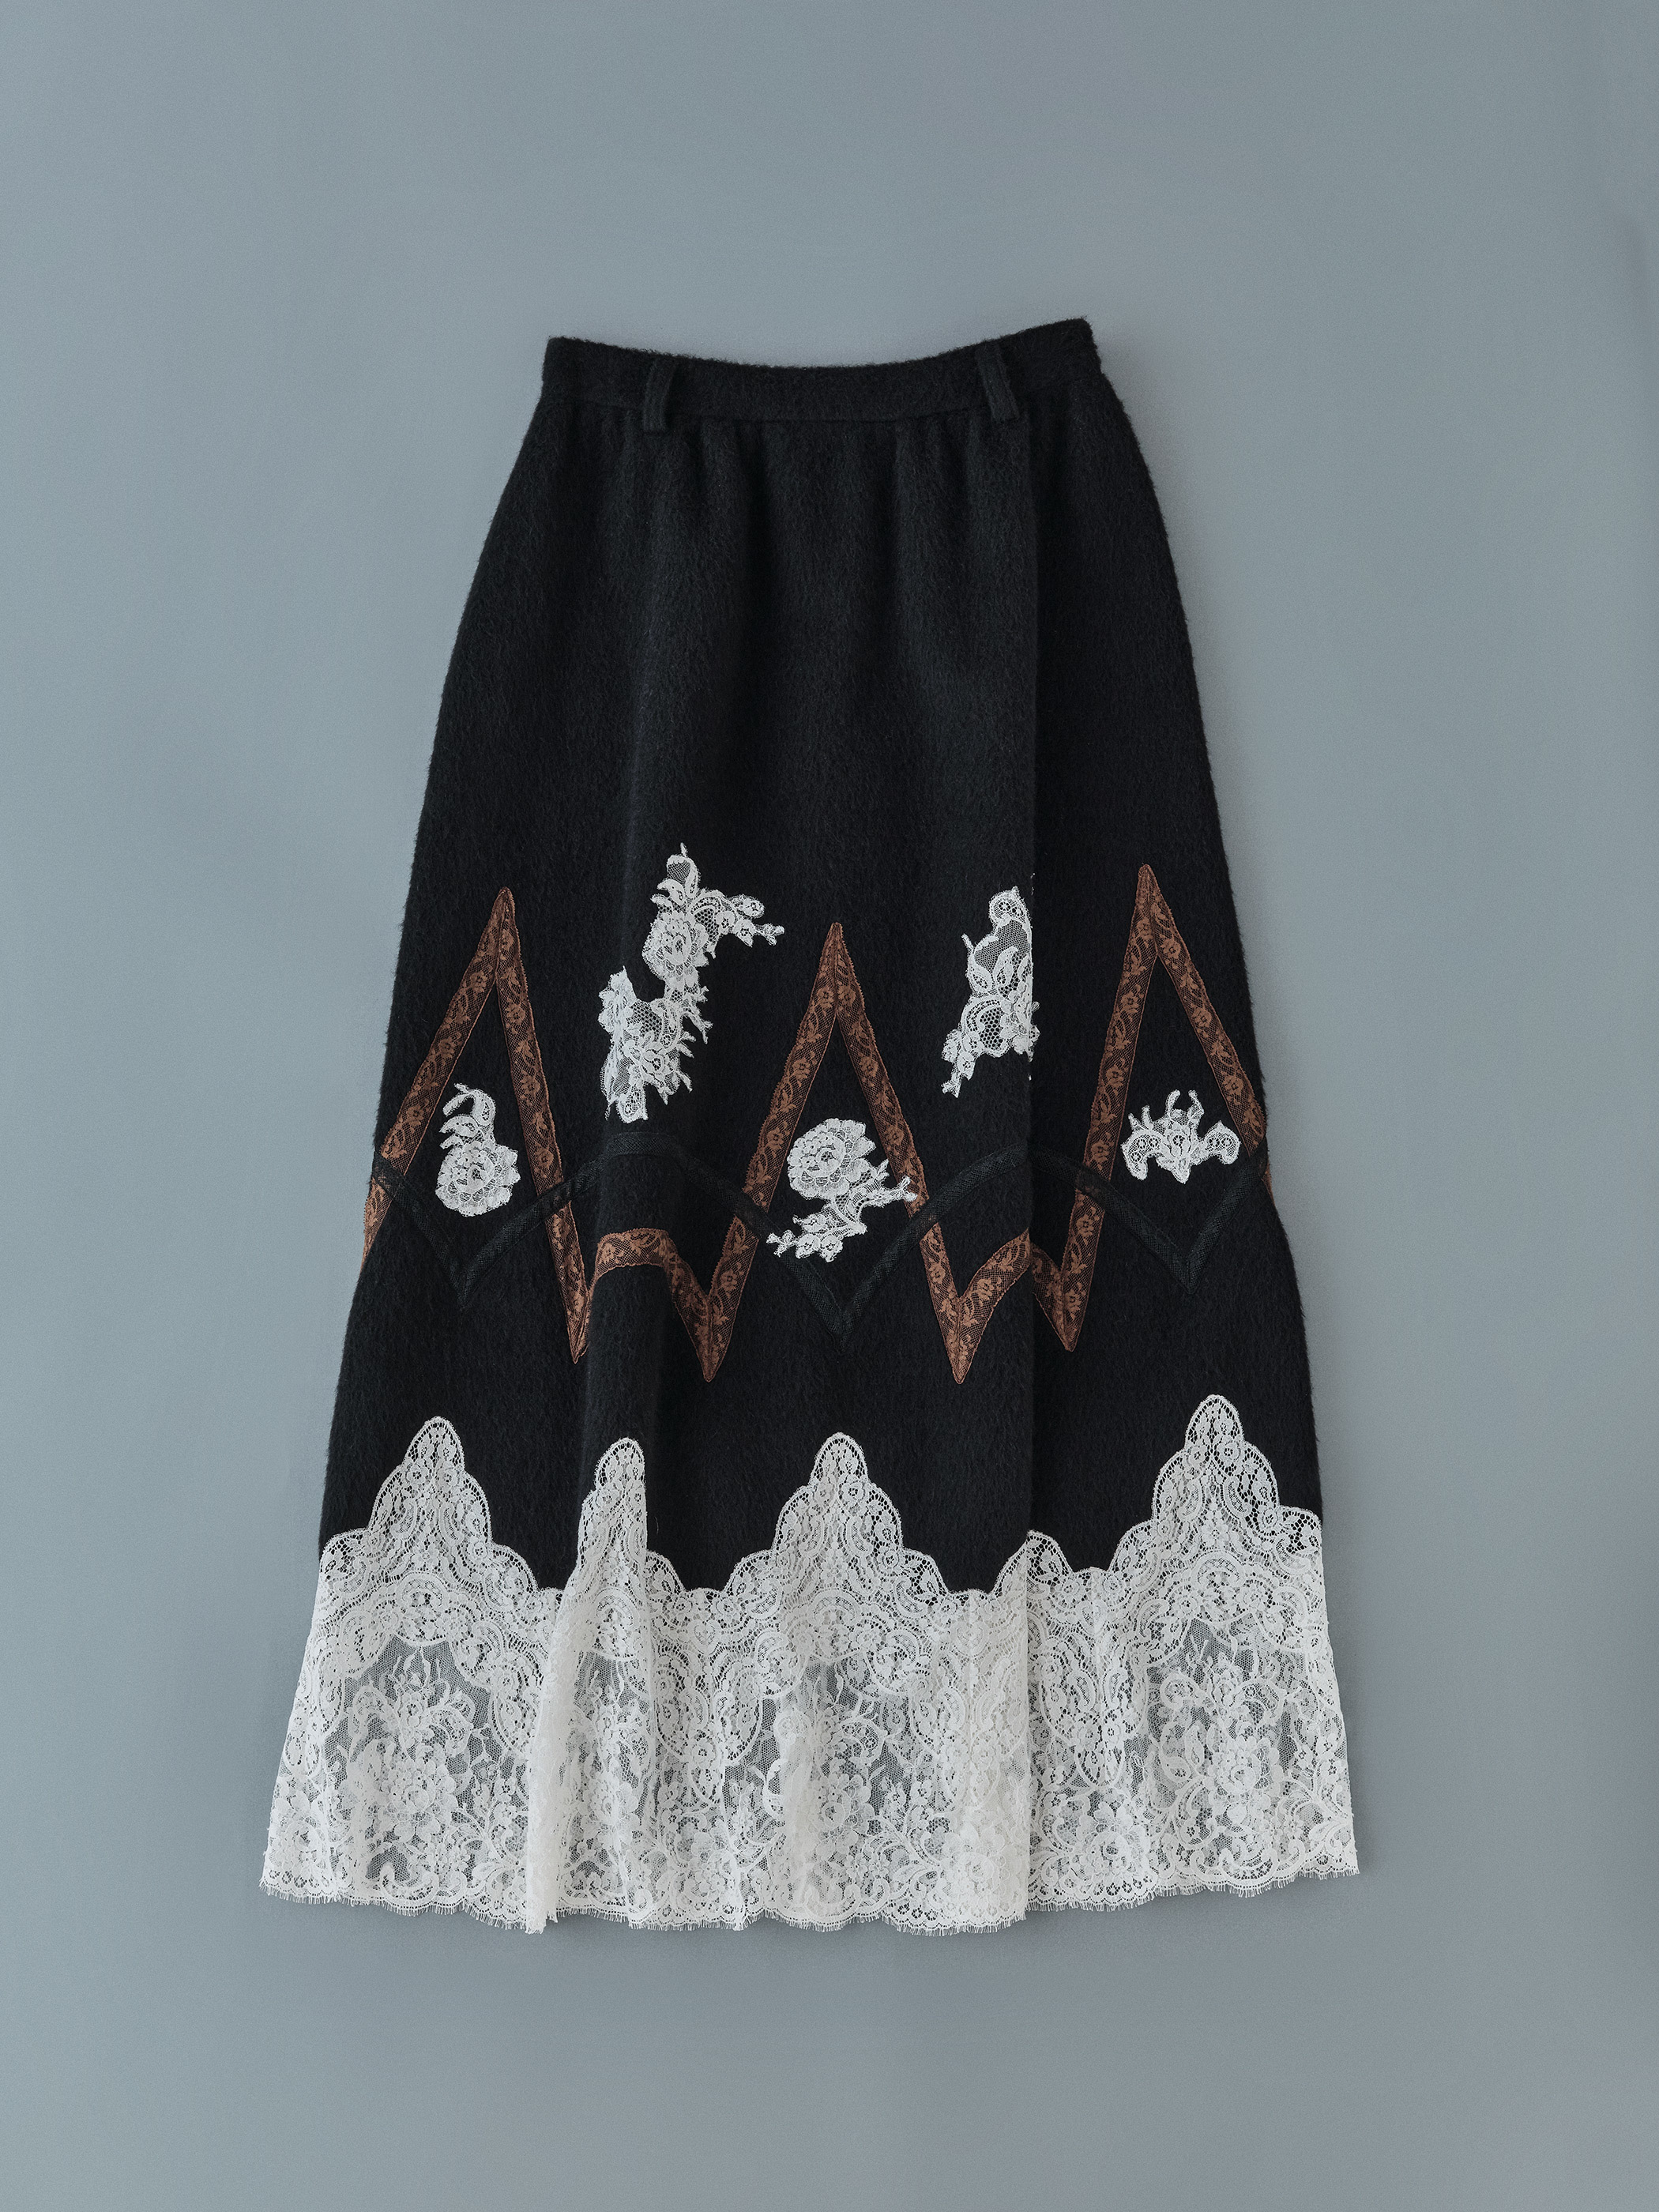 【SOLD】lace skirt